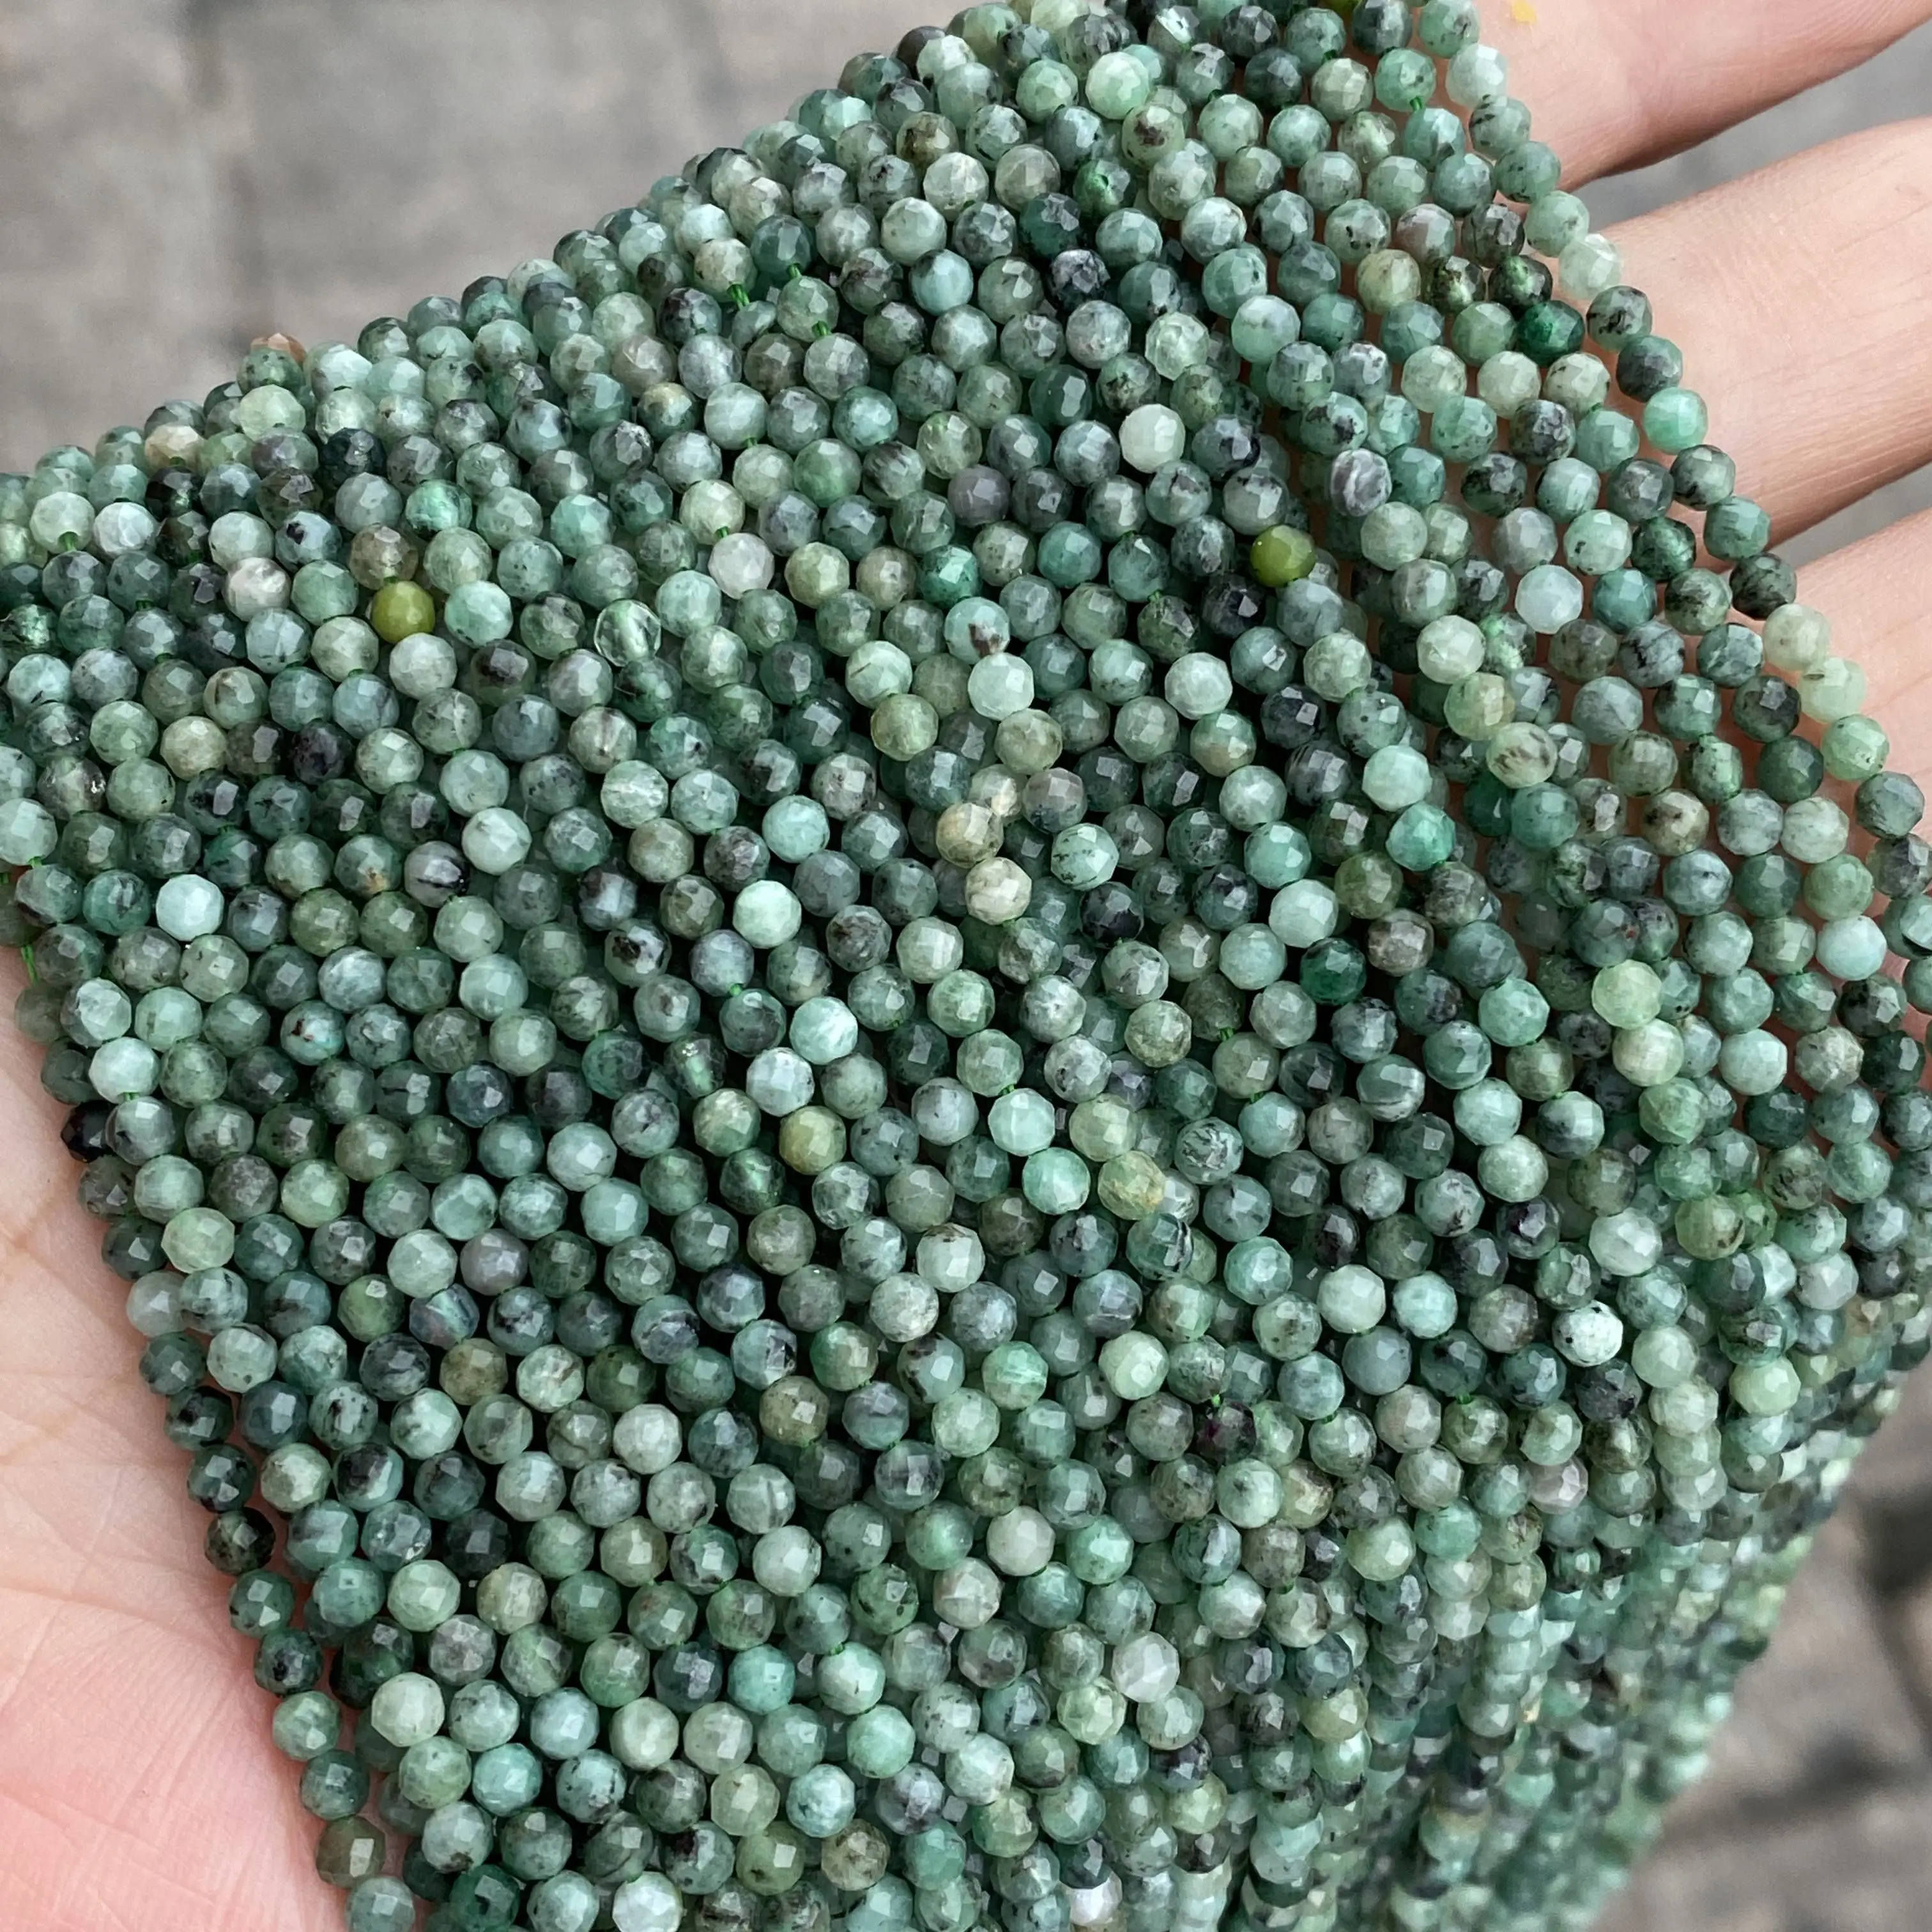 

Natural Stone 2mm 3mm 4mm Green Emerald Faceted Cutting Loose Round Beads for Jewelry Bracelet DIY Making